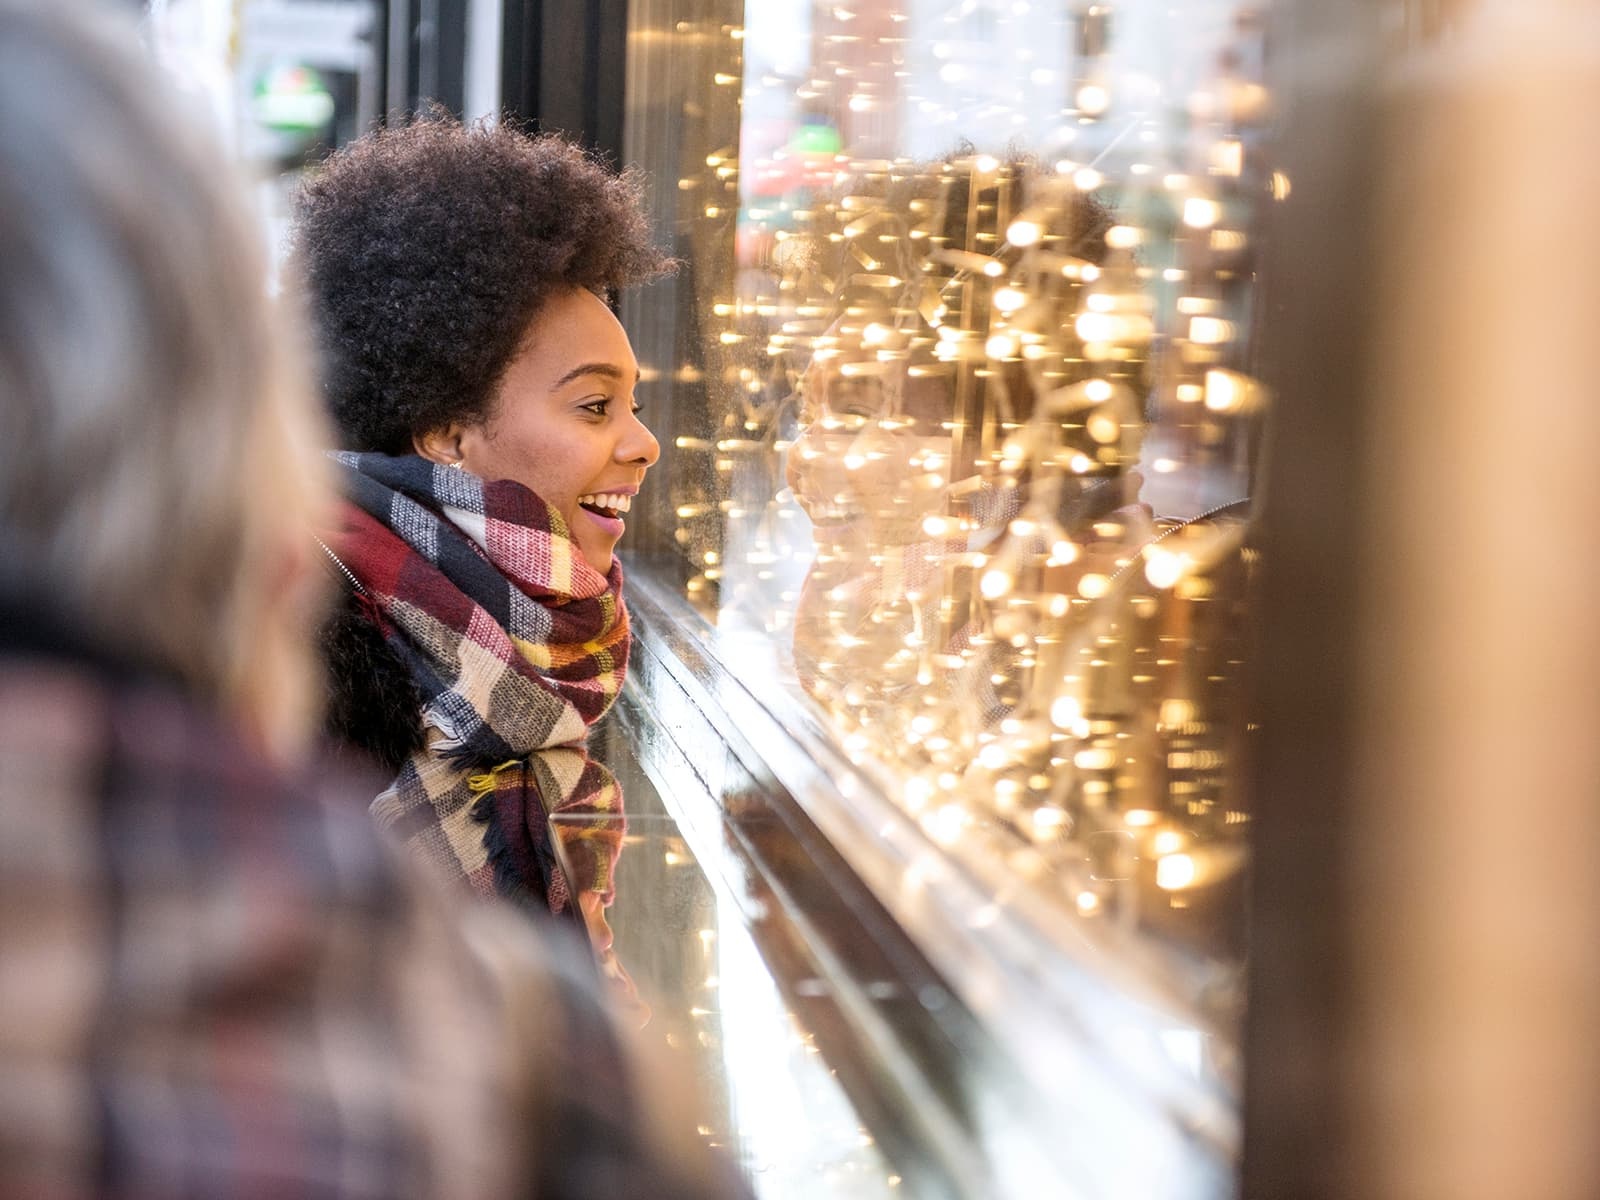 Woman wearing a scarf looking into a holiday window display with lights